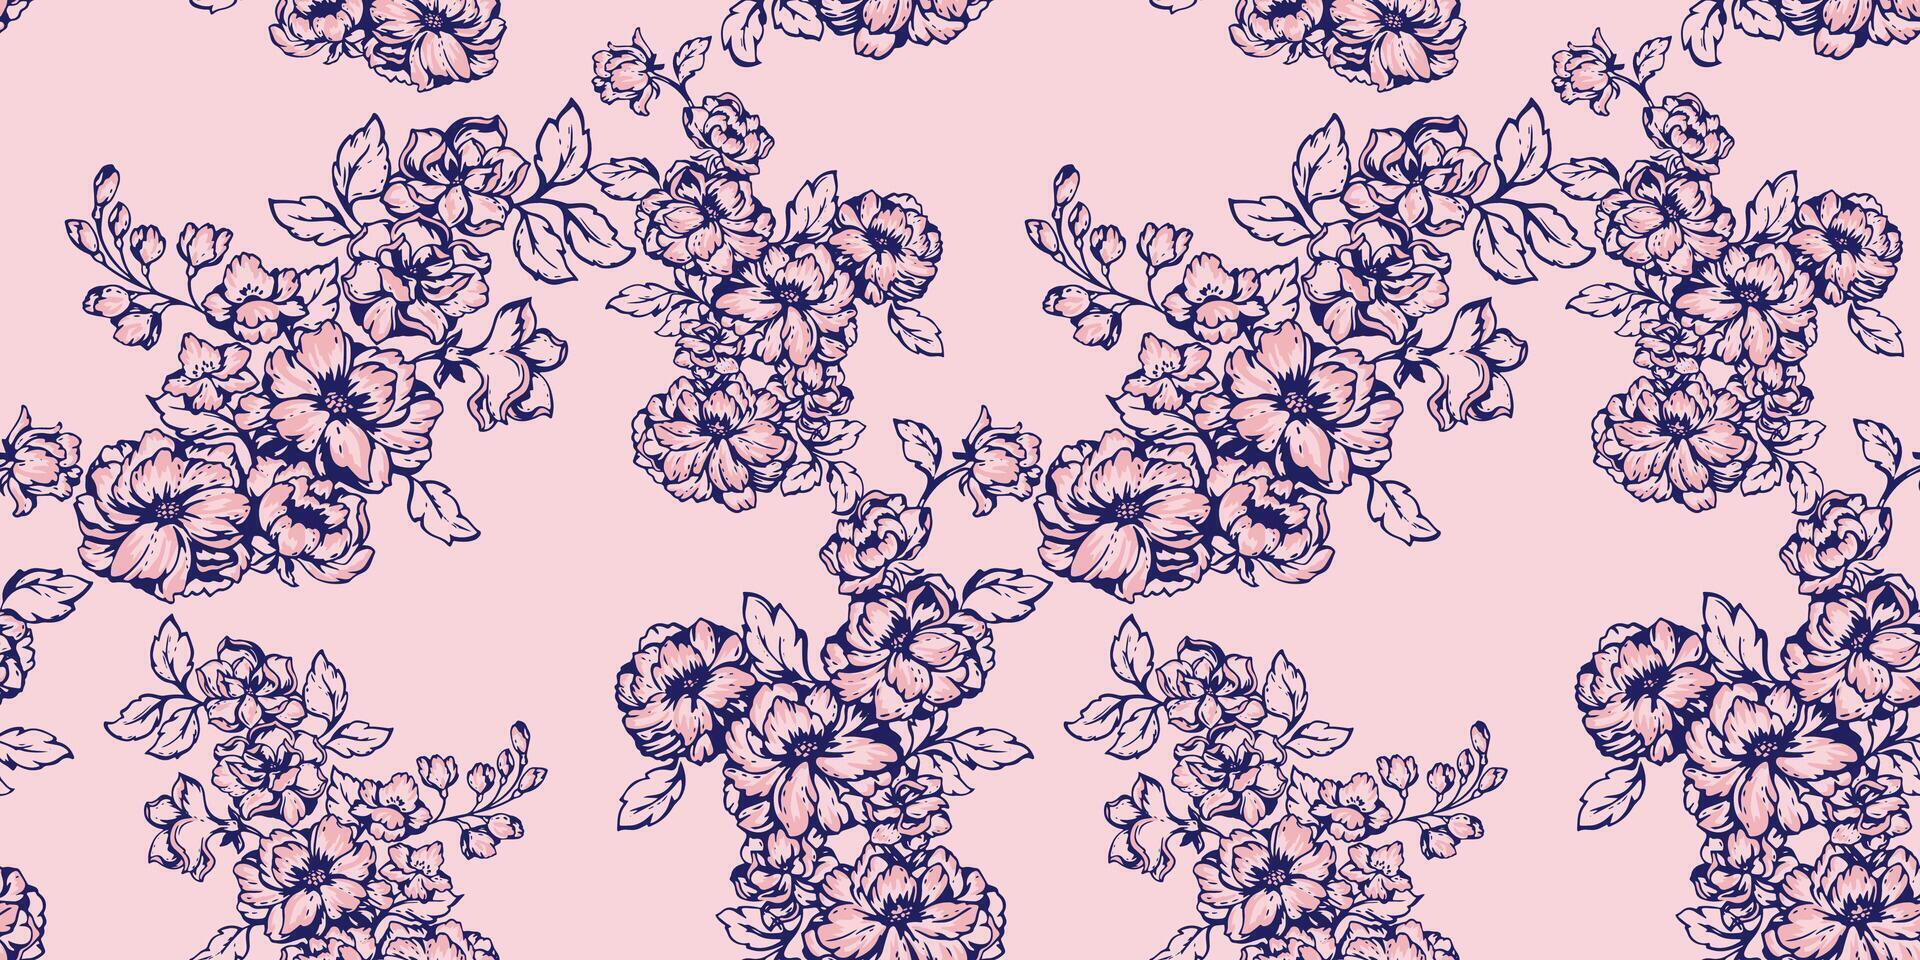 Seamless artistic stylized lines branches floral pattern of branches. Blooming field in many types of flowers on a pink background. Vector drawn hand. Template for textile, fashion, print, fabric